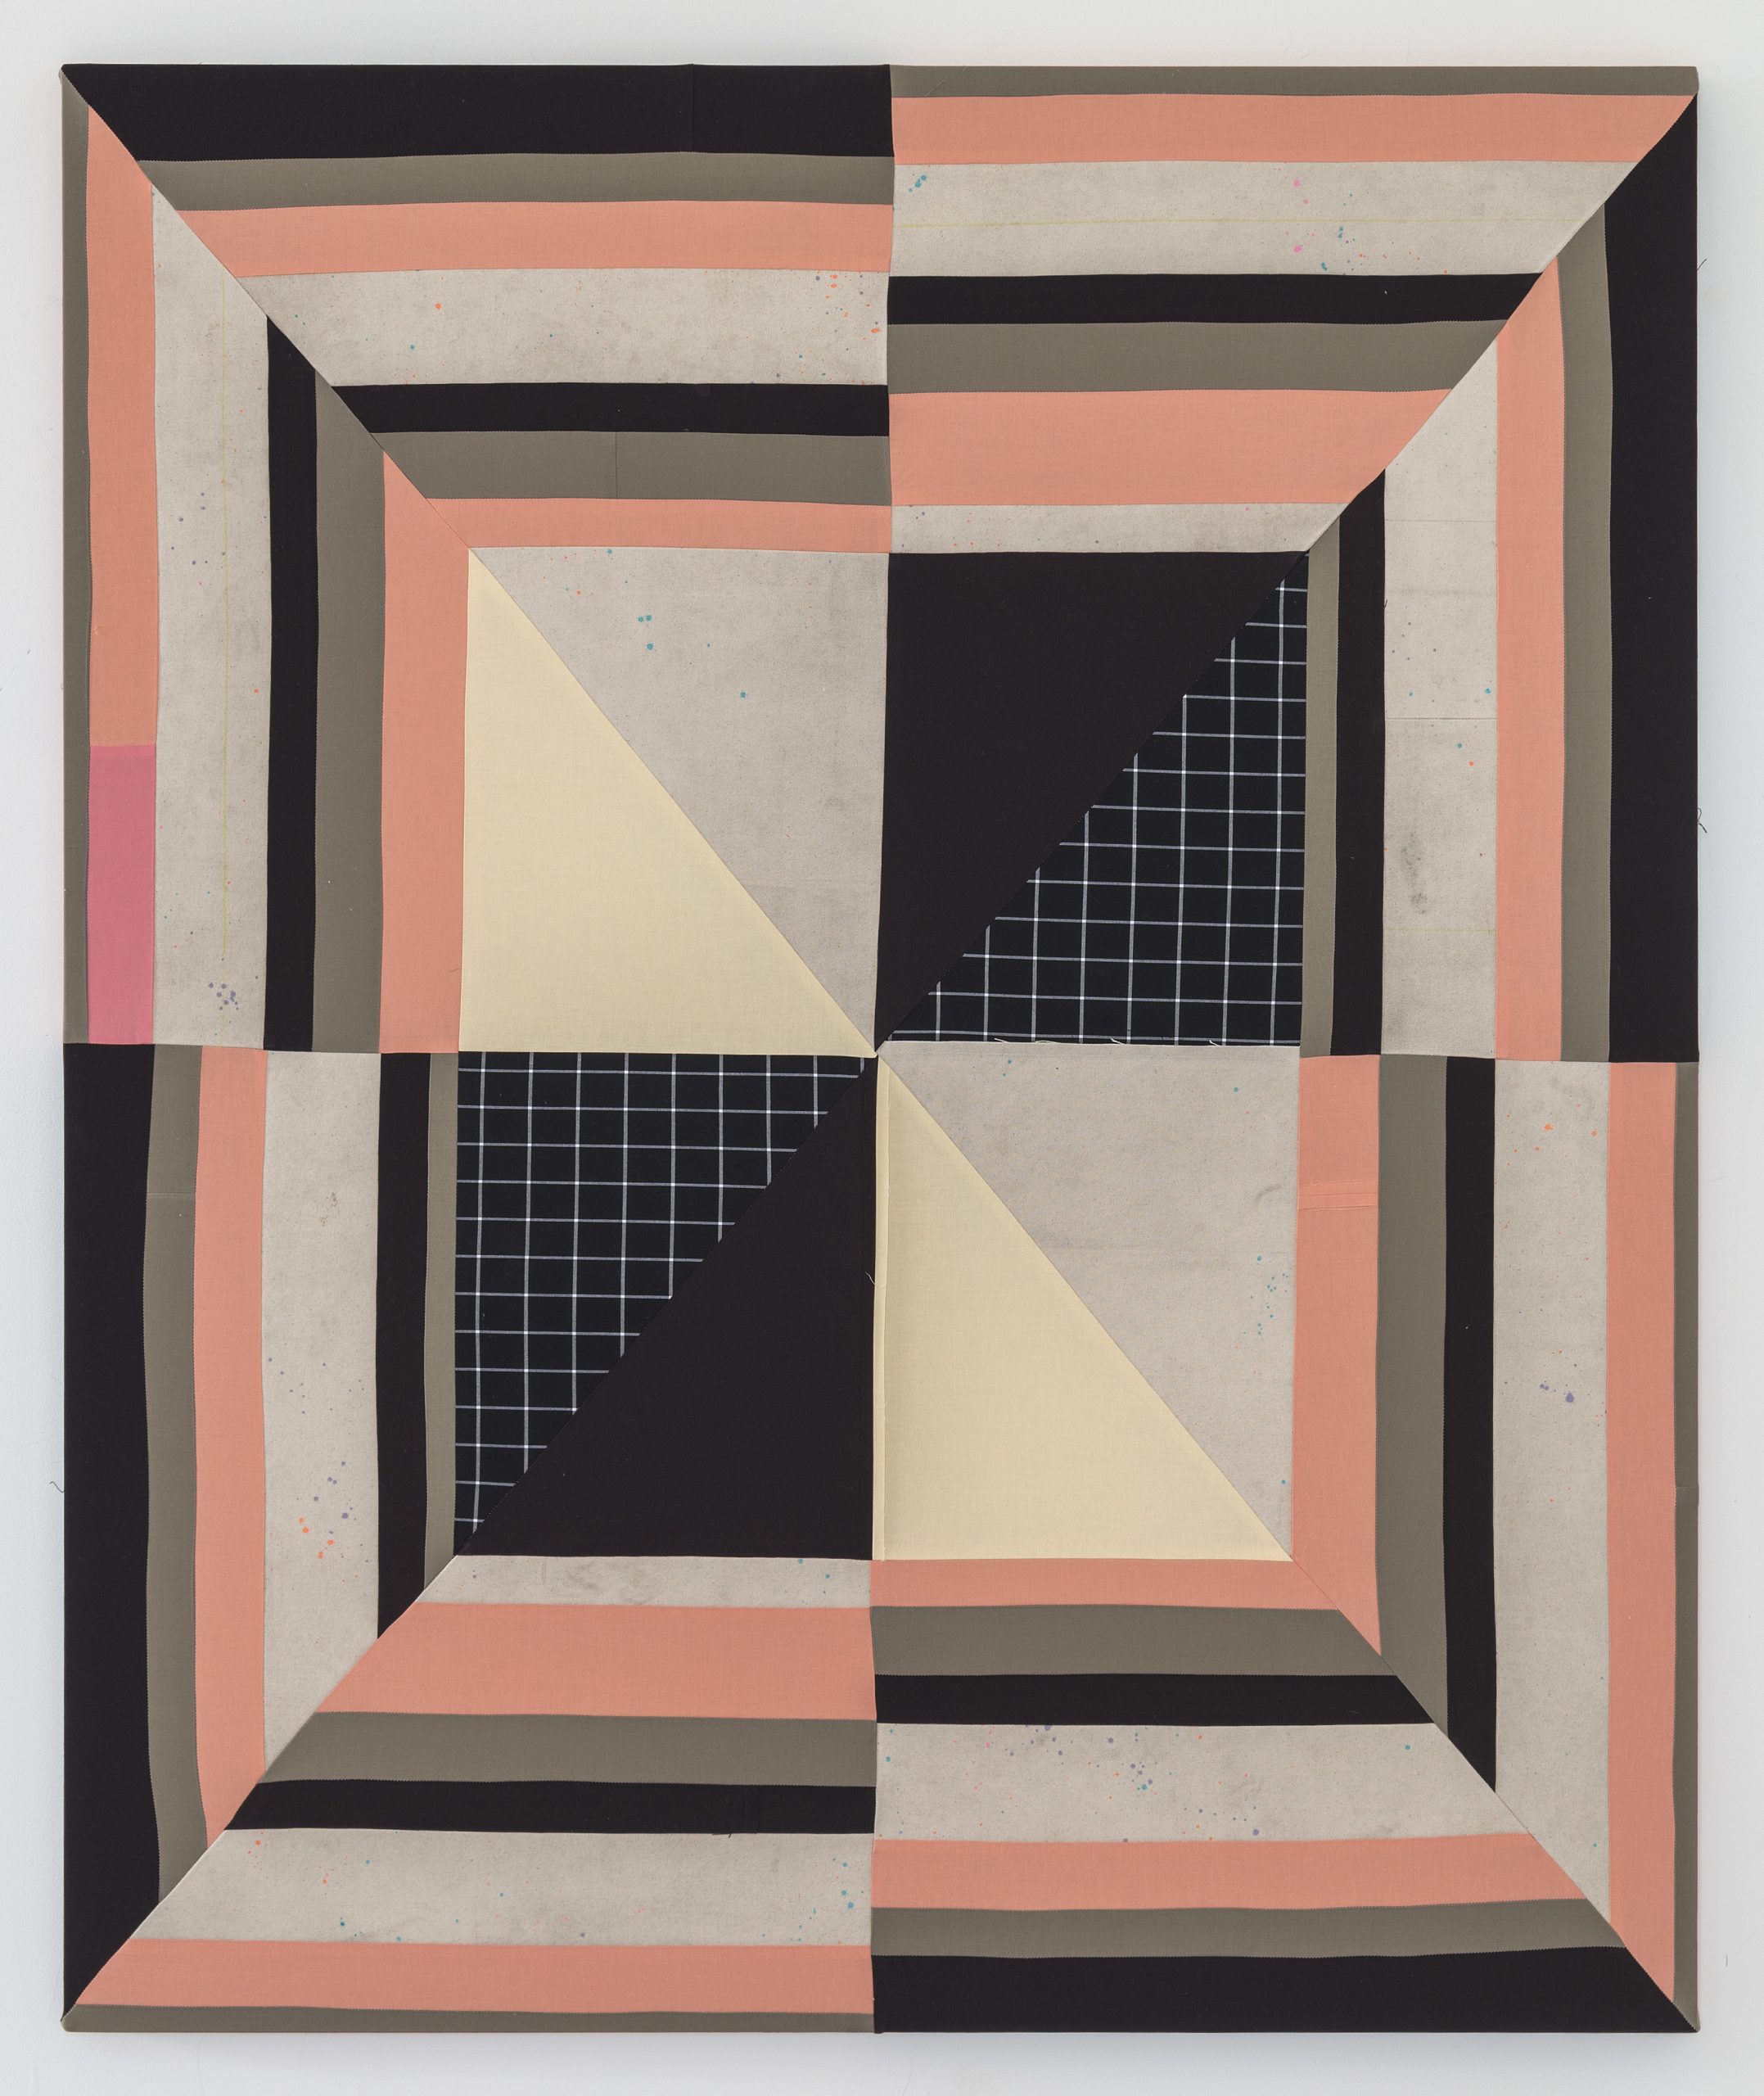 Geometric abstract painting with a symmetrical composition of triangles and rectangles in a muted color palette.